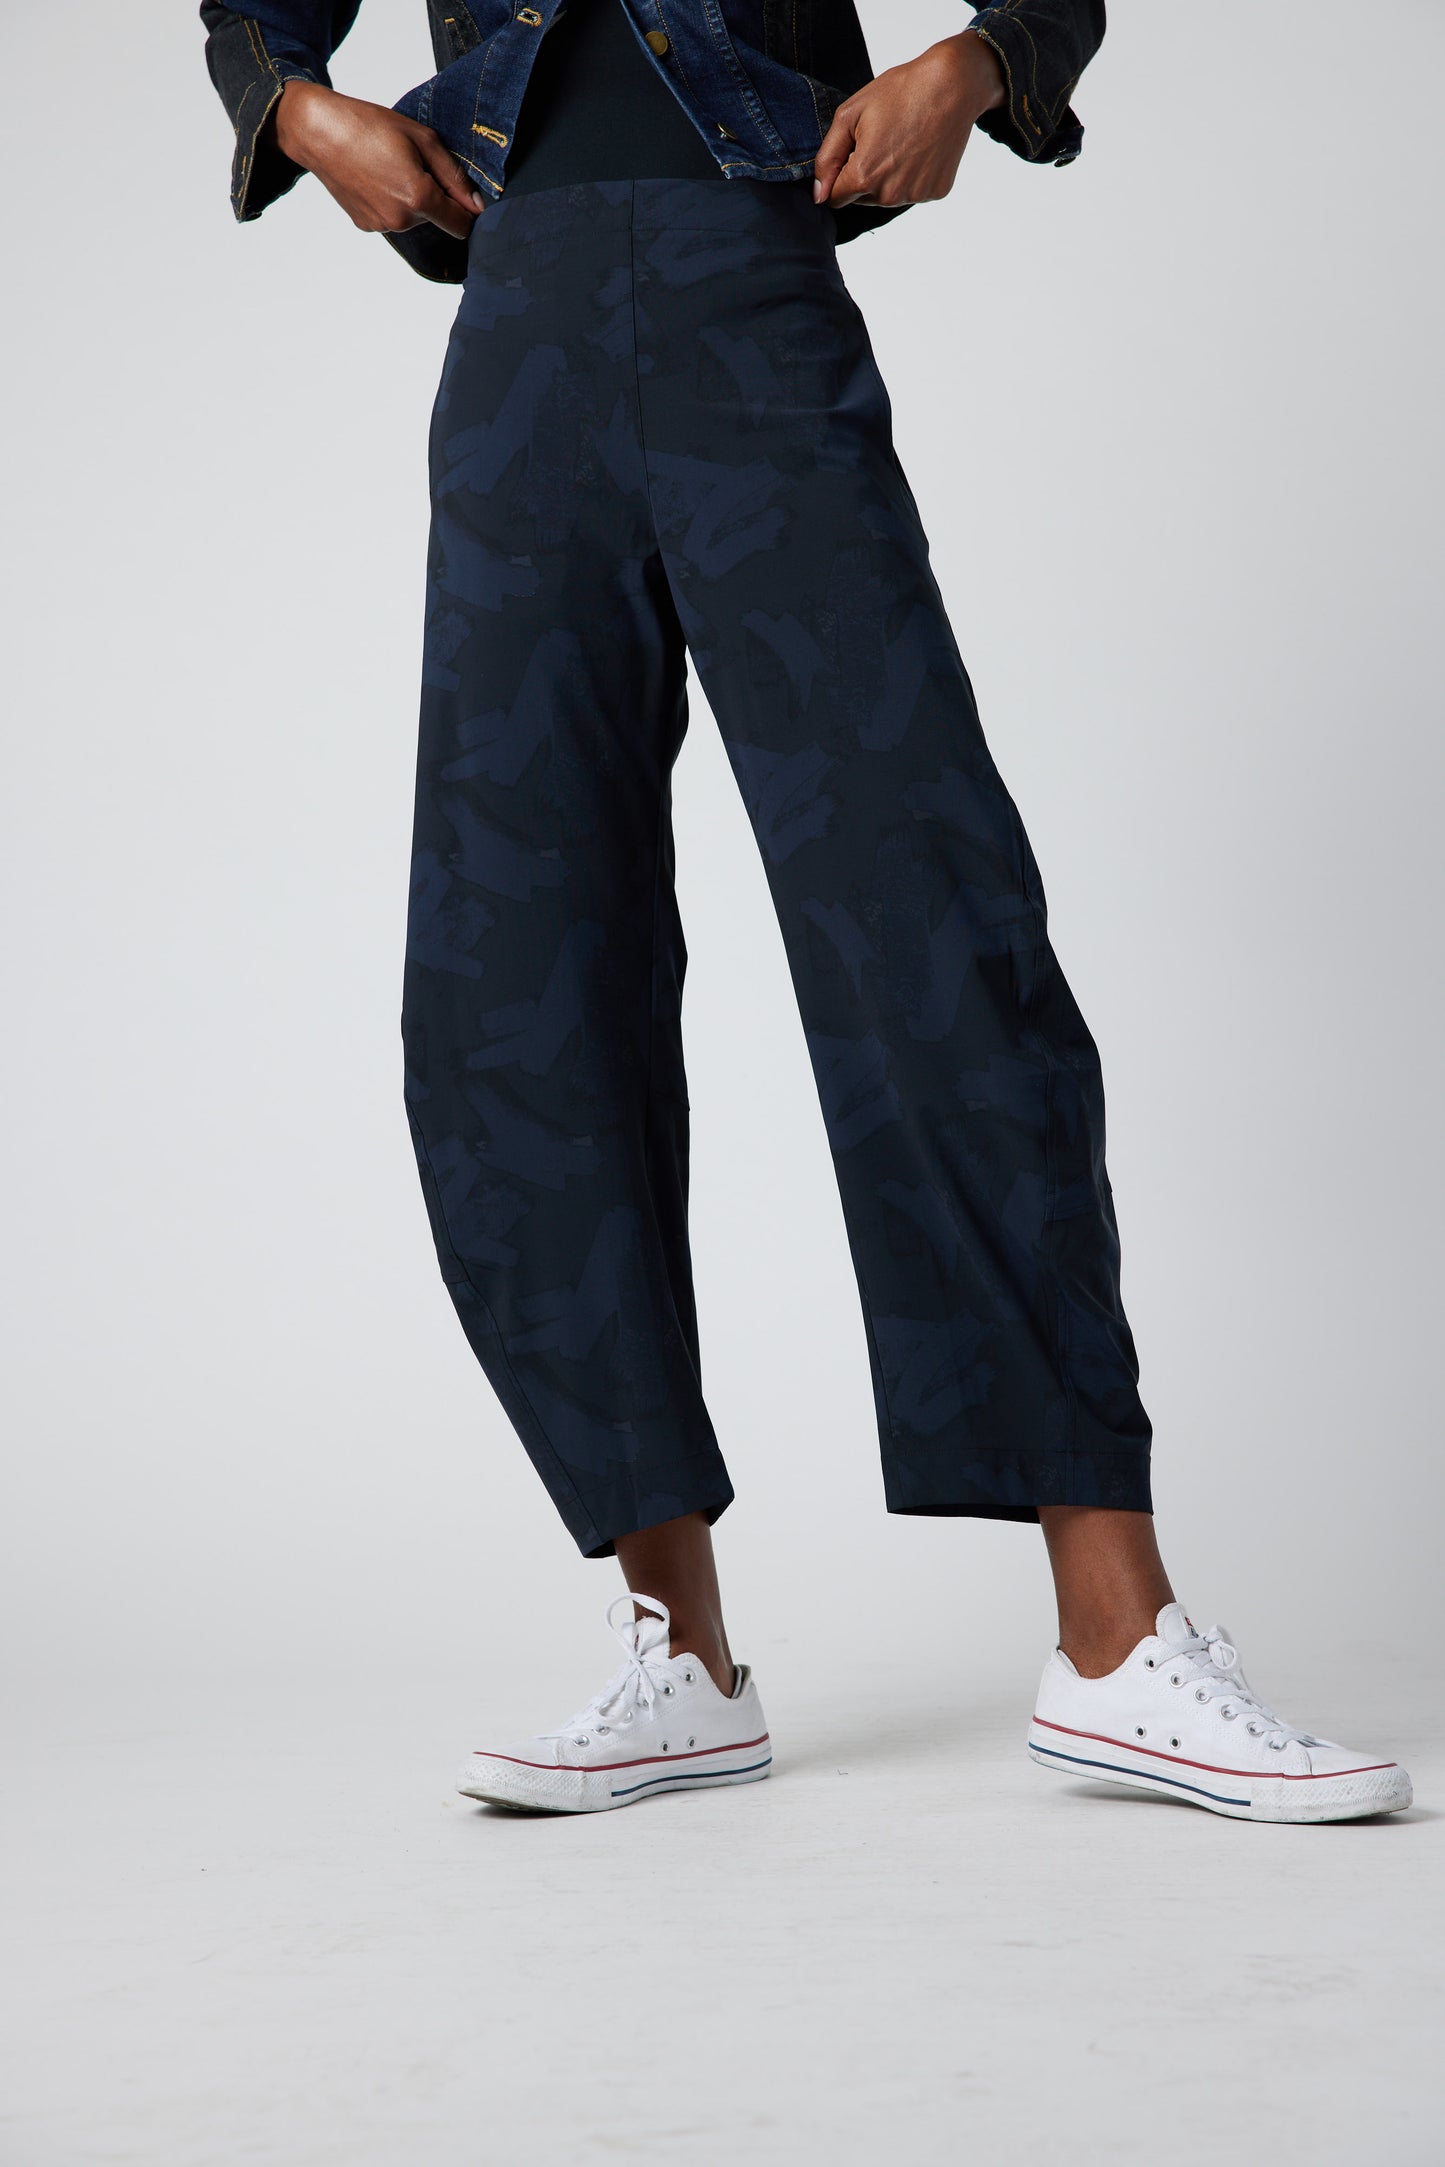 The Brushstroke On The Loose Work Pants